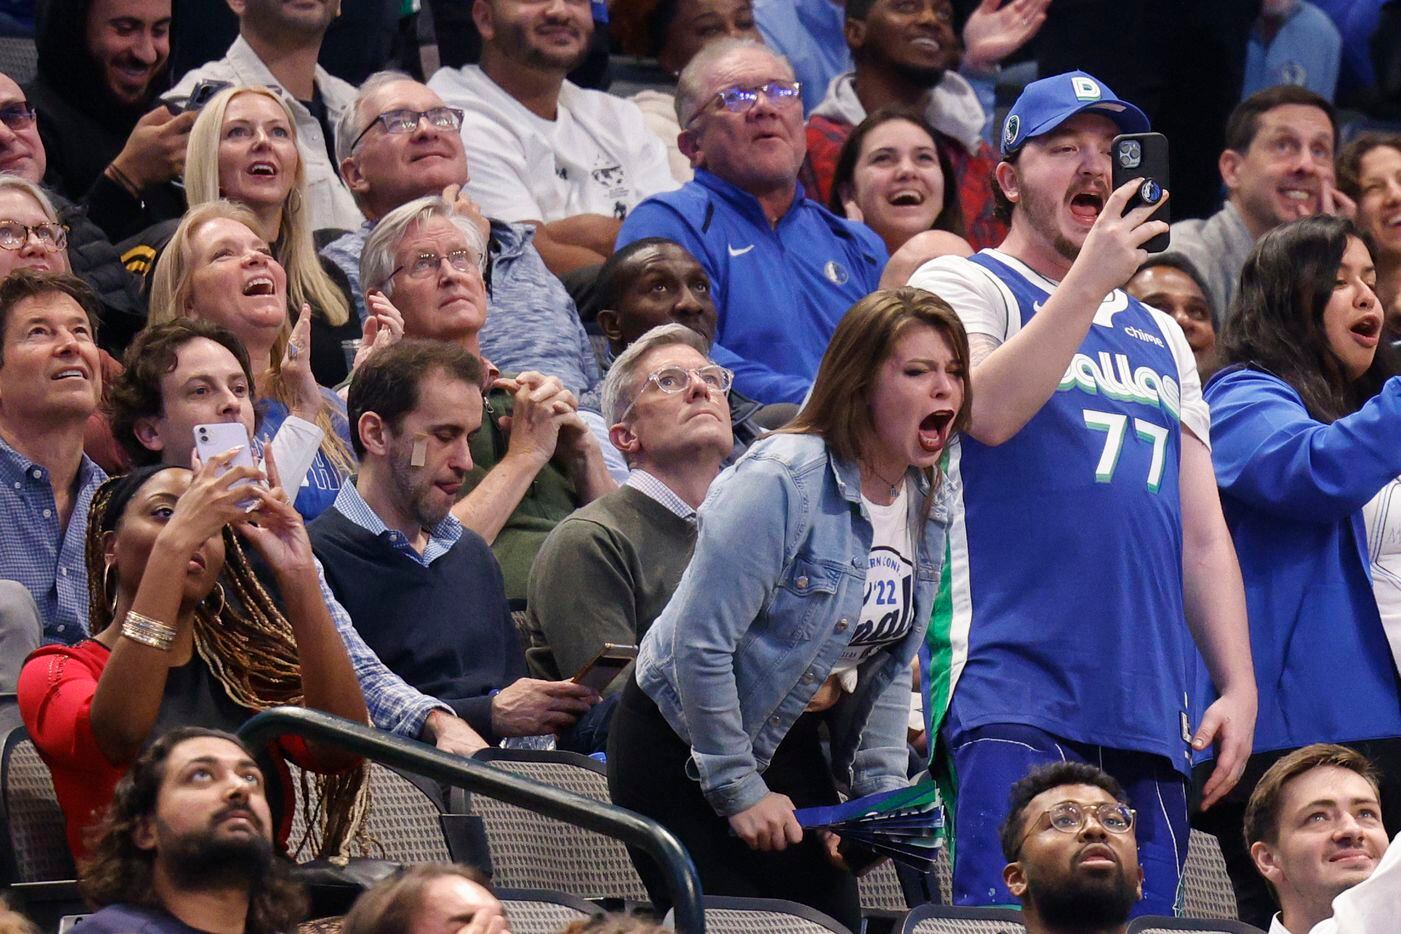 Dallas Mavericks fans cheer and chant “OBJ” as NFL free agent Odell Beckham Jr. is shown...